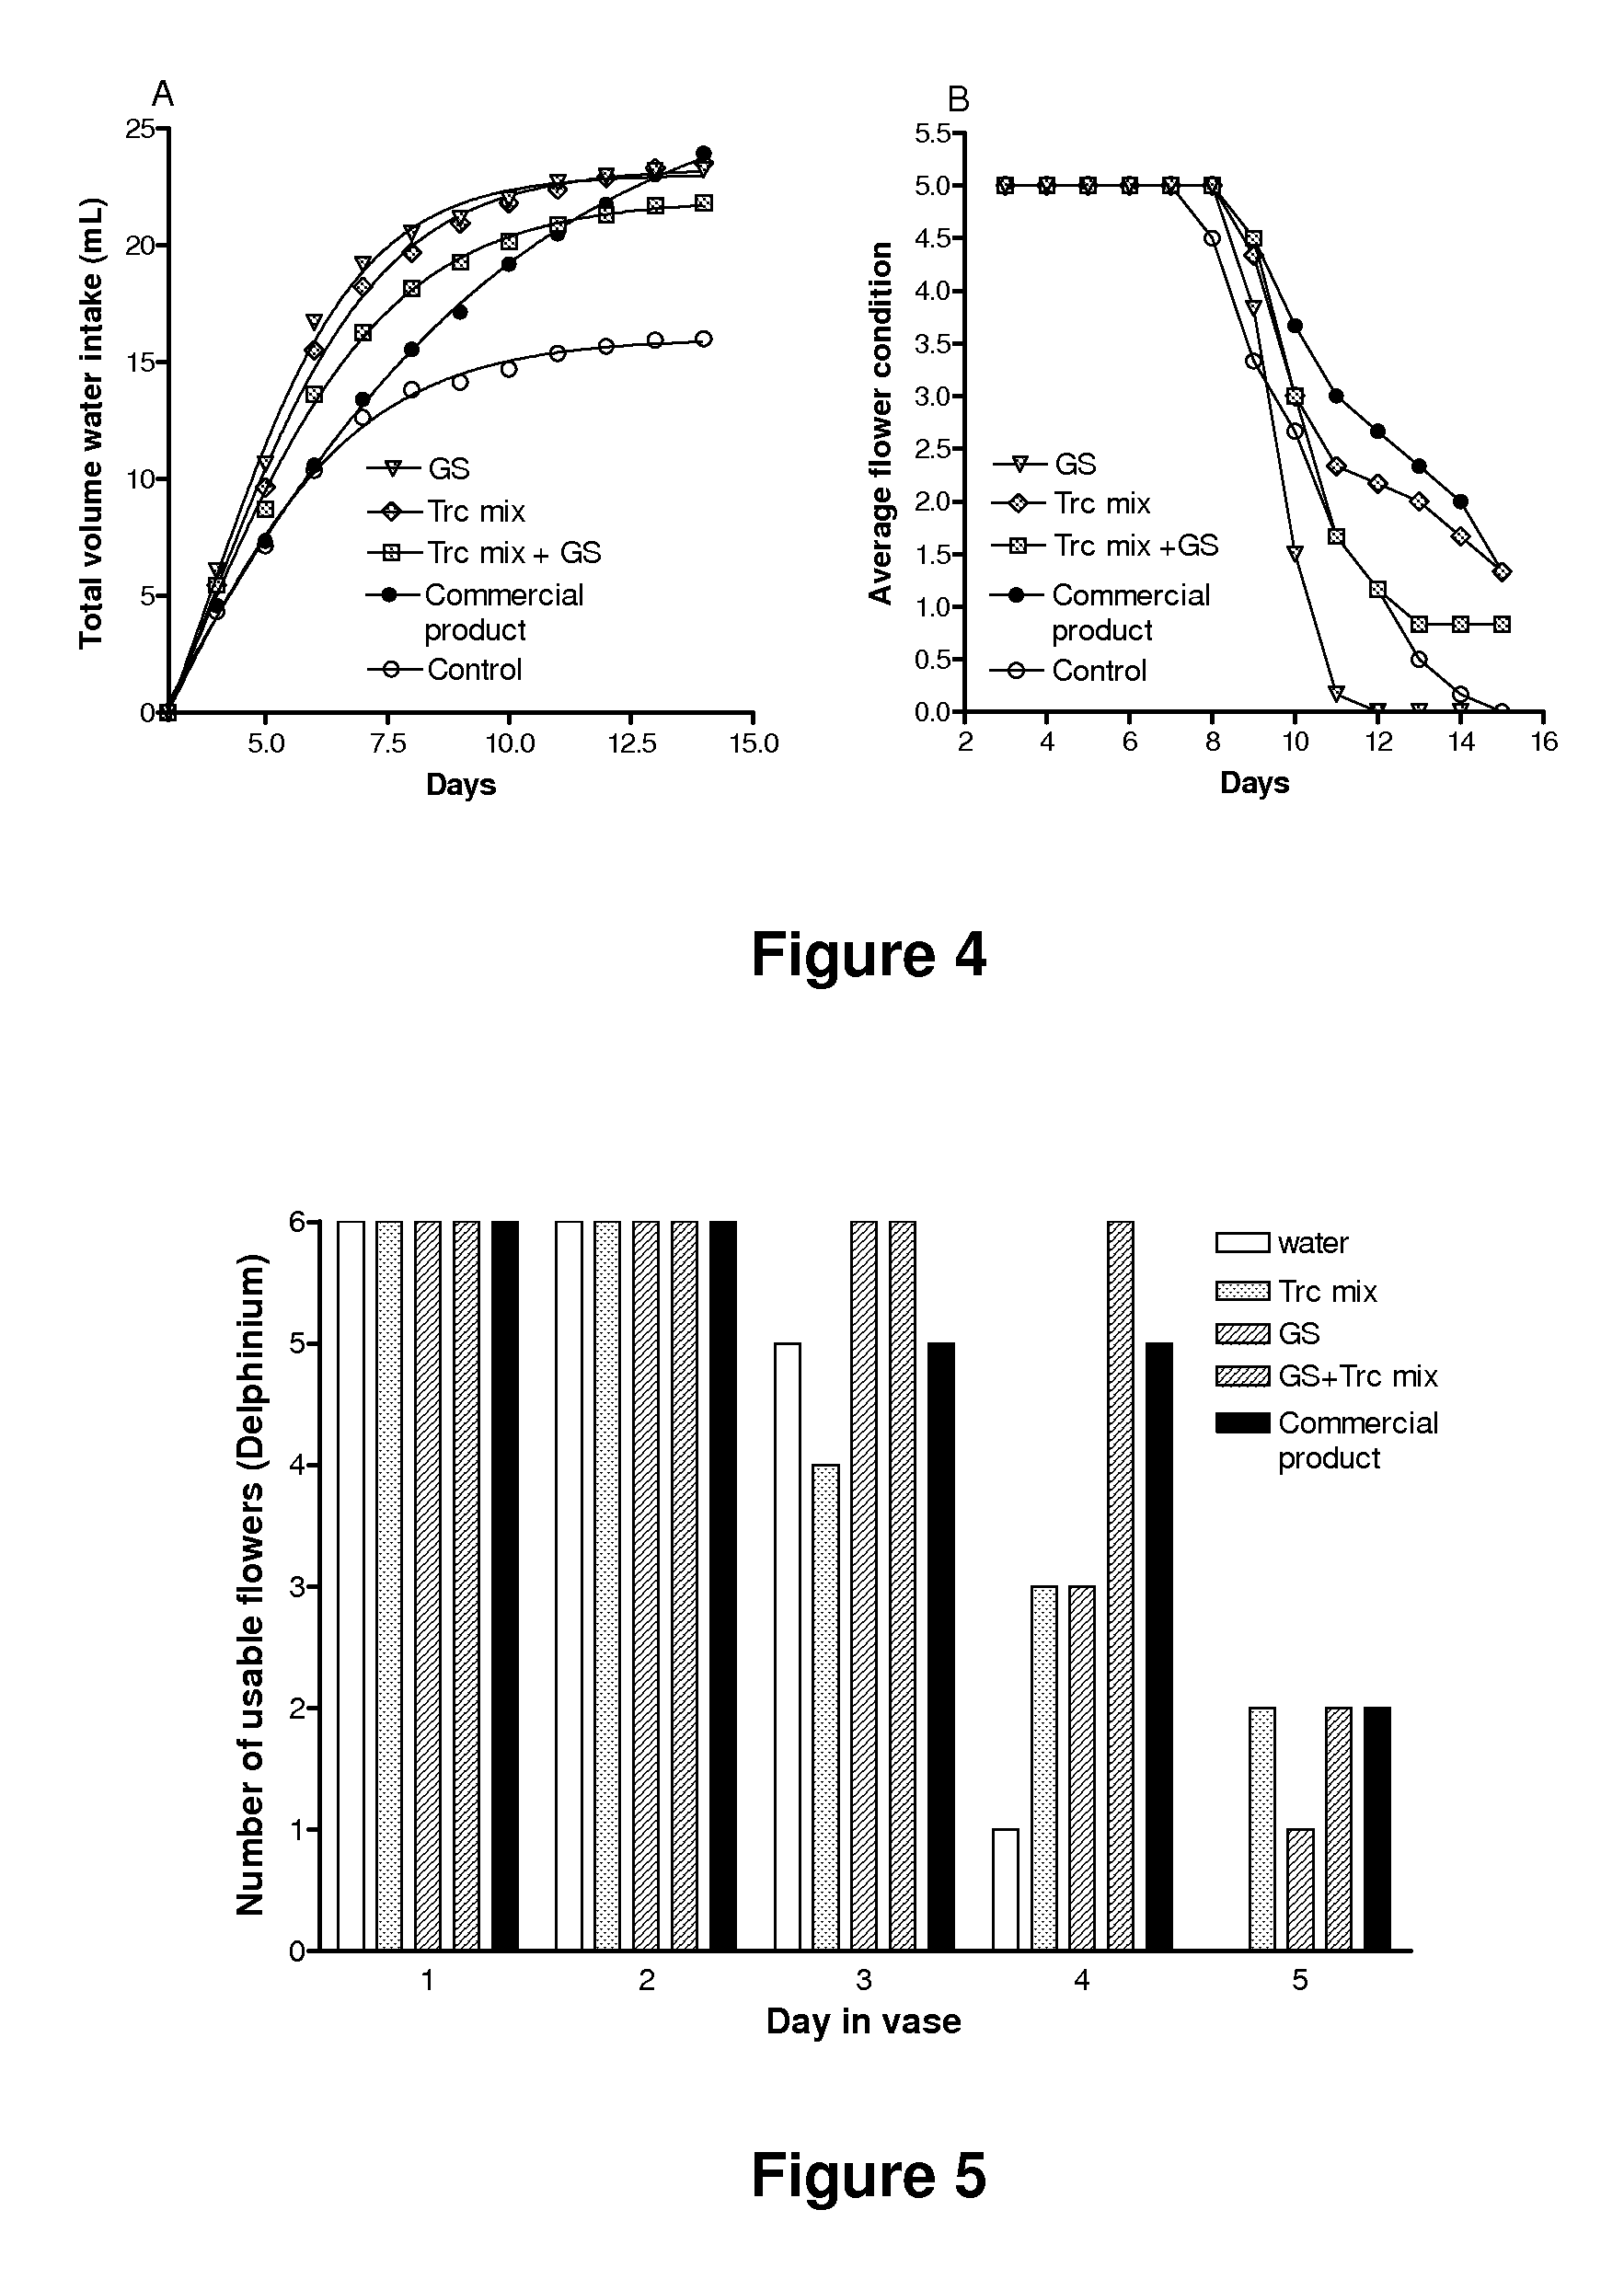 Antimicrobial peptide compositions for plants